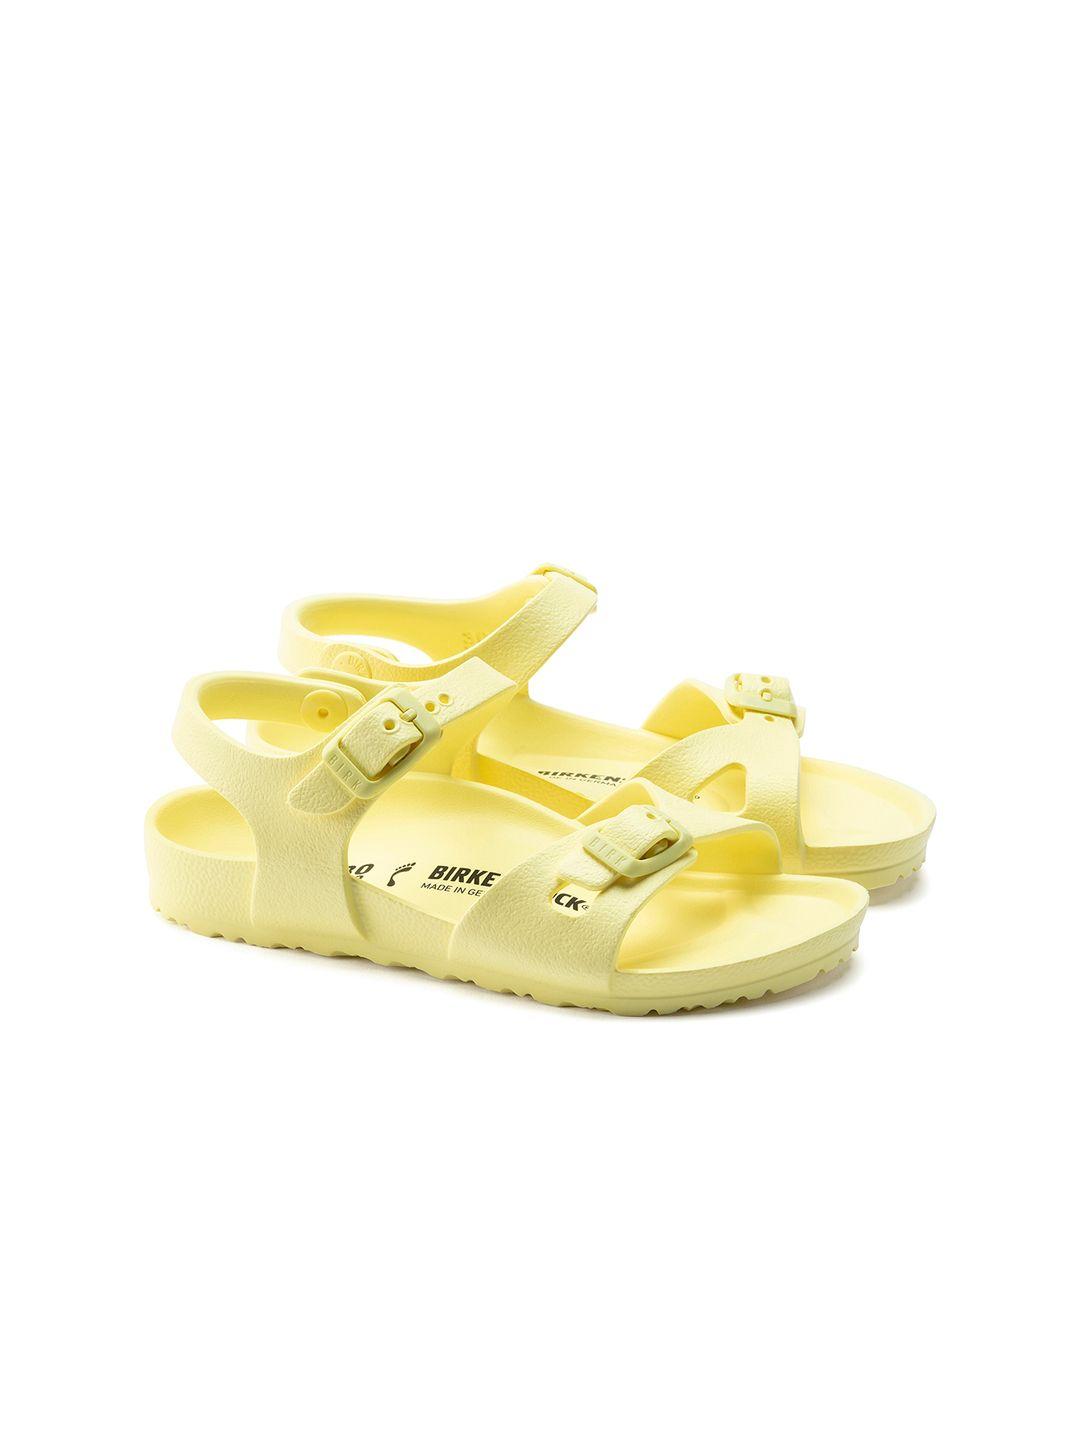 birkenstock rio kids yellow narrow width girls with an ankle strap sandals